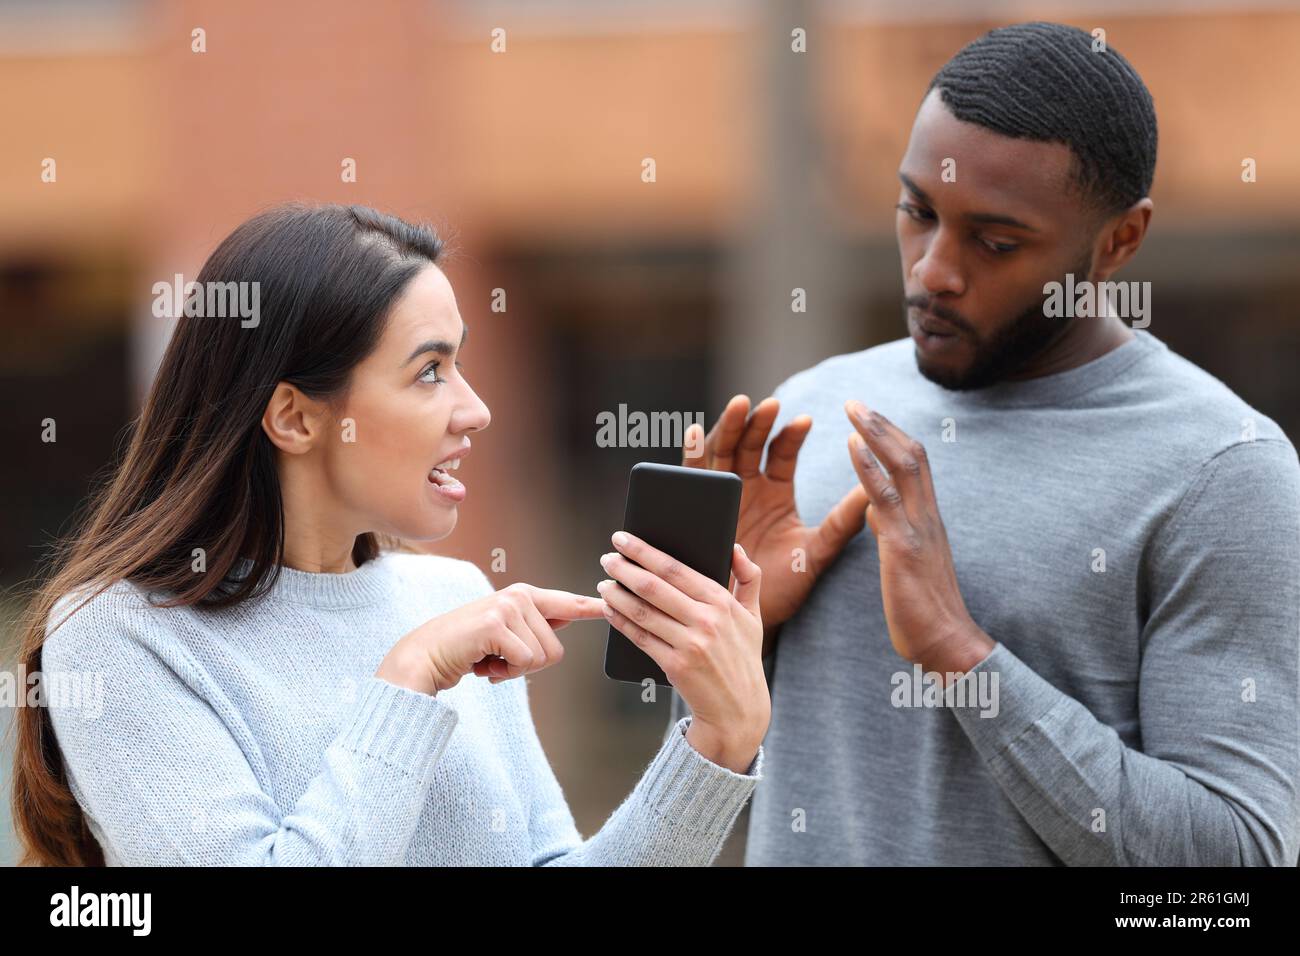 Angry woman scolding a shocked man showing cell phone content in the street Stock Photo